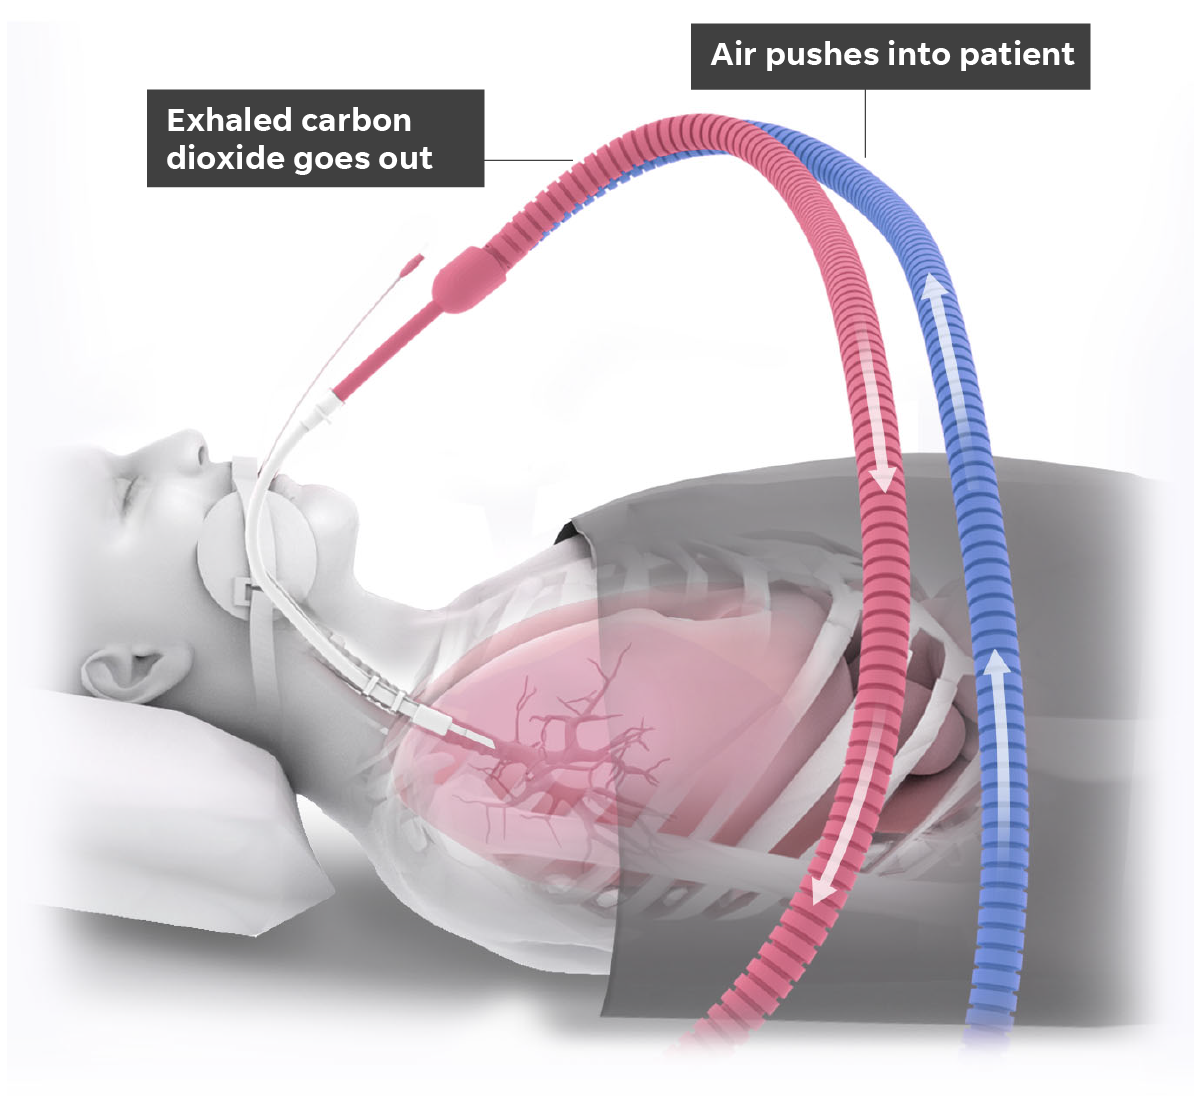 How does mechanical ventilation work during an operation?